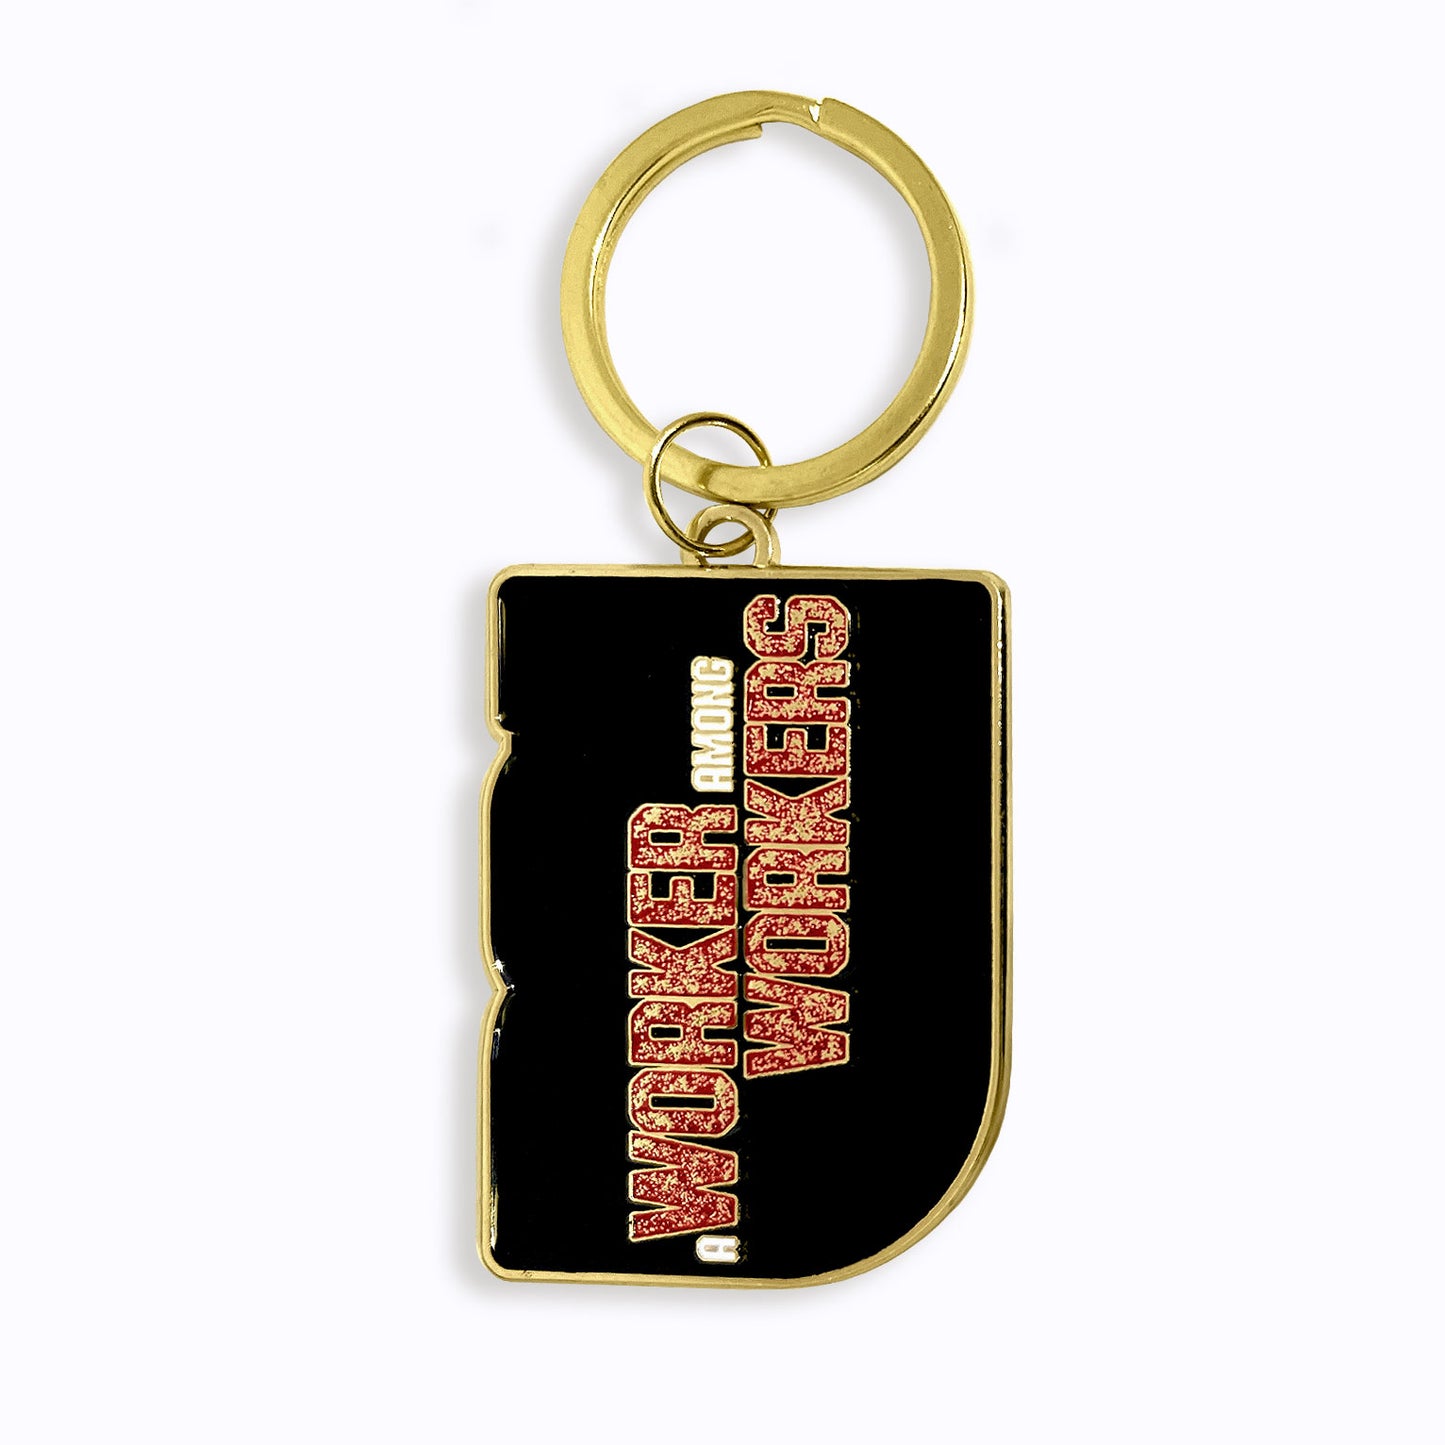 "A Worker Among Workers" Key Chain